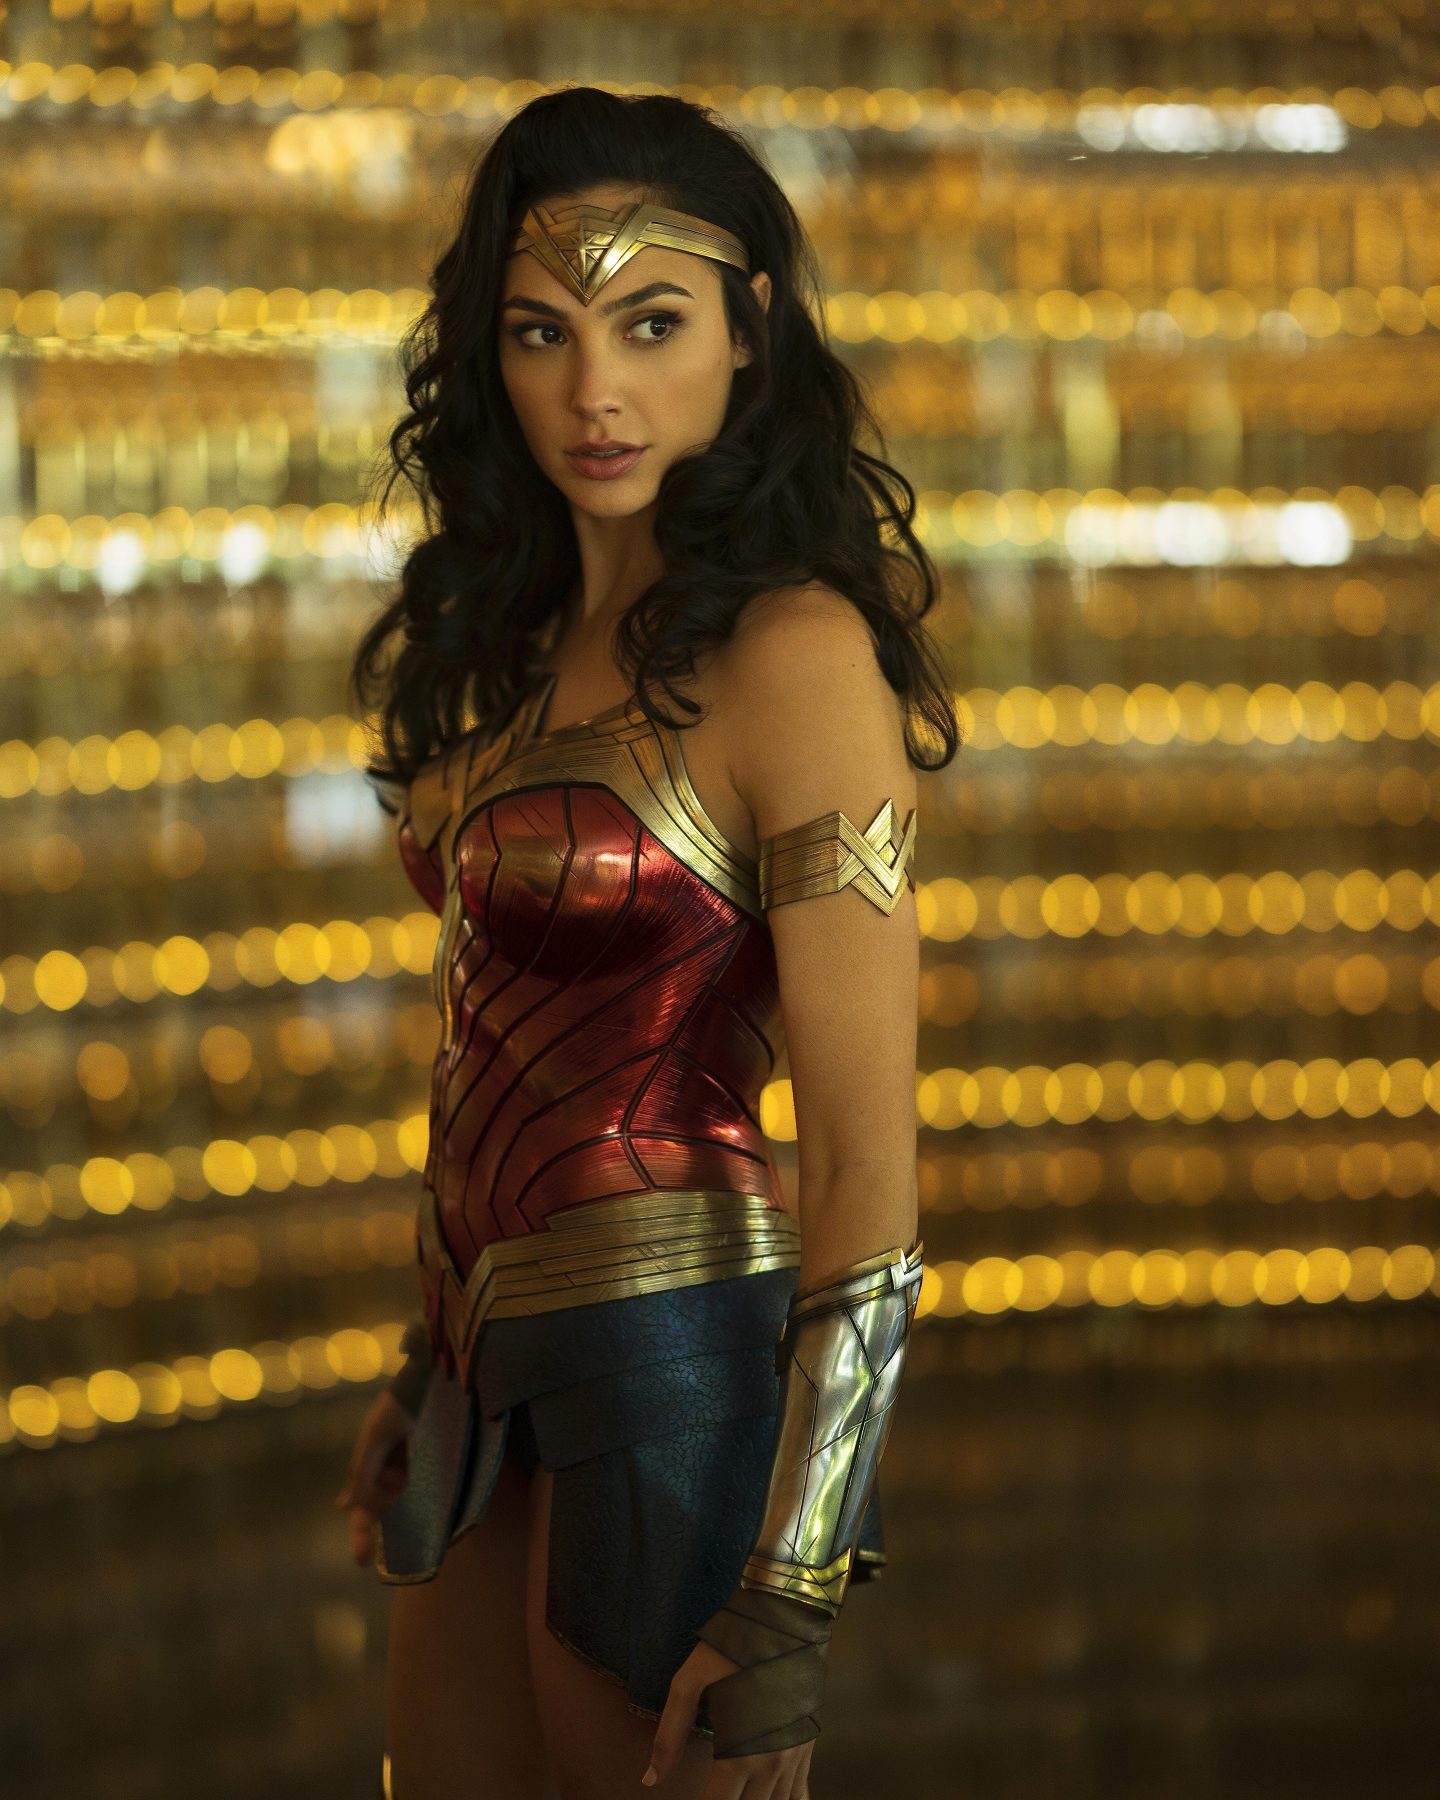 Take A Look Back On Gal Gadot S Most Iconic Roles Thus Far